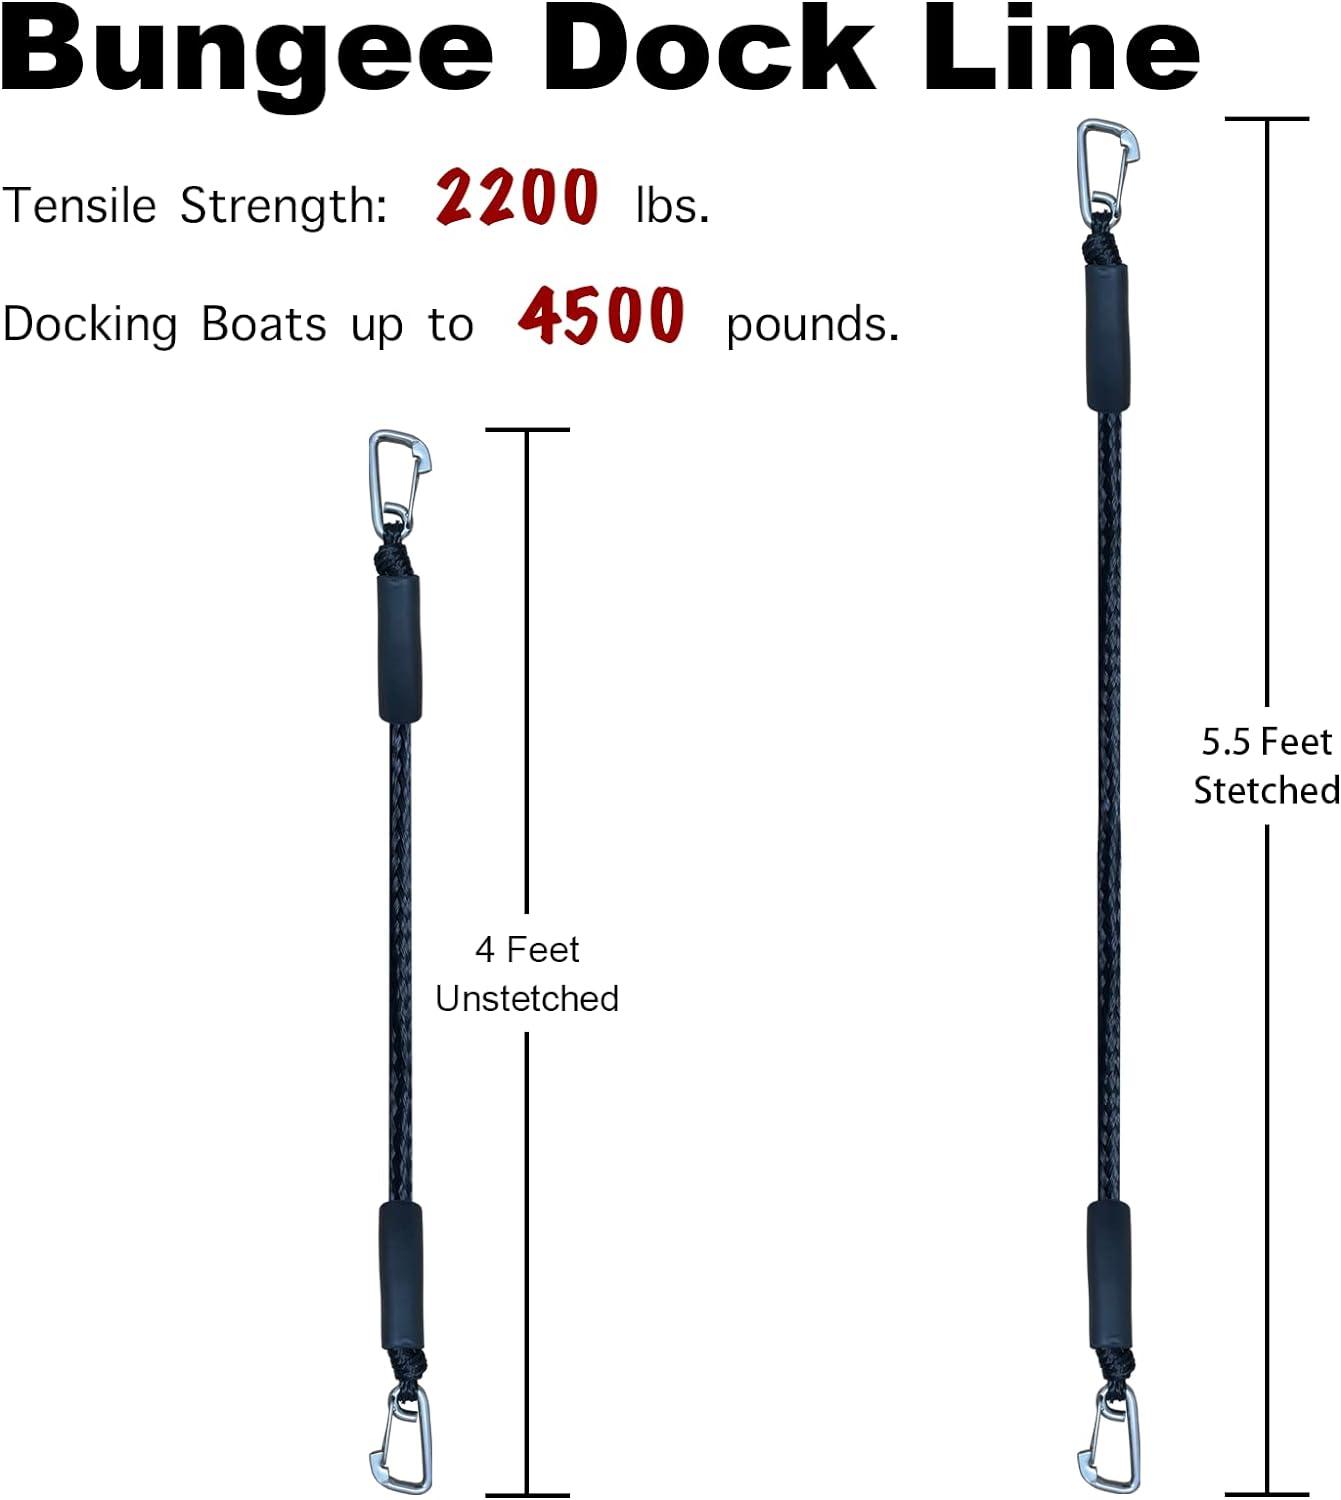 Pwc Bungee Dock Line Yacht Braid Rope with Stainless Steel Clip